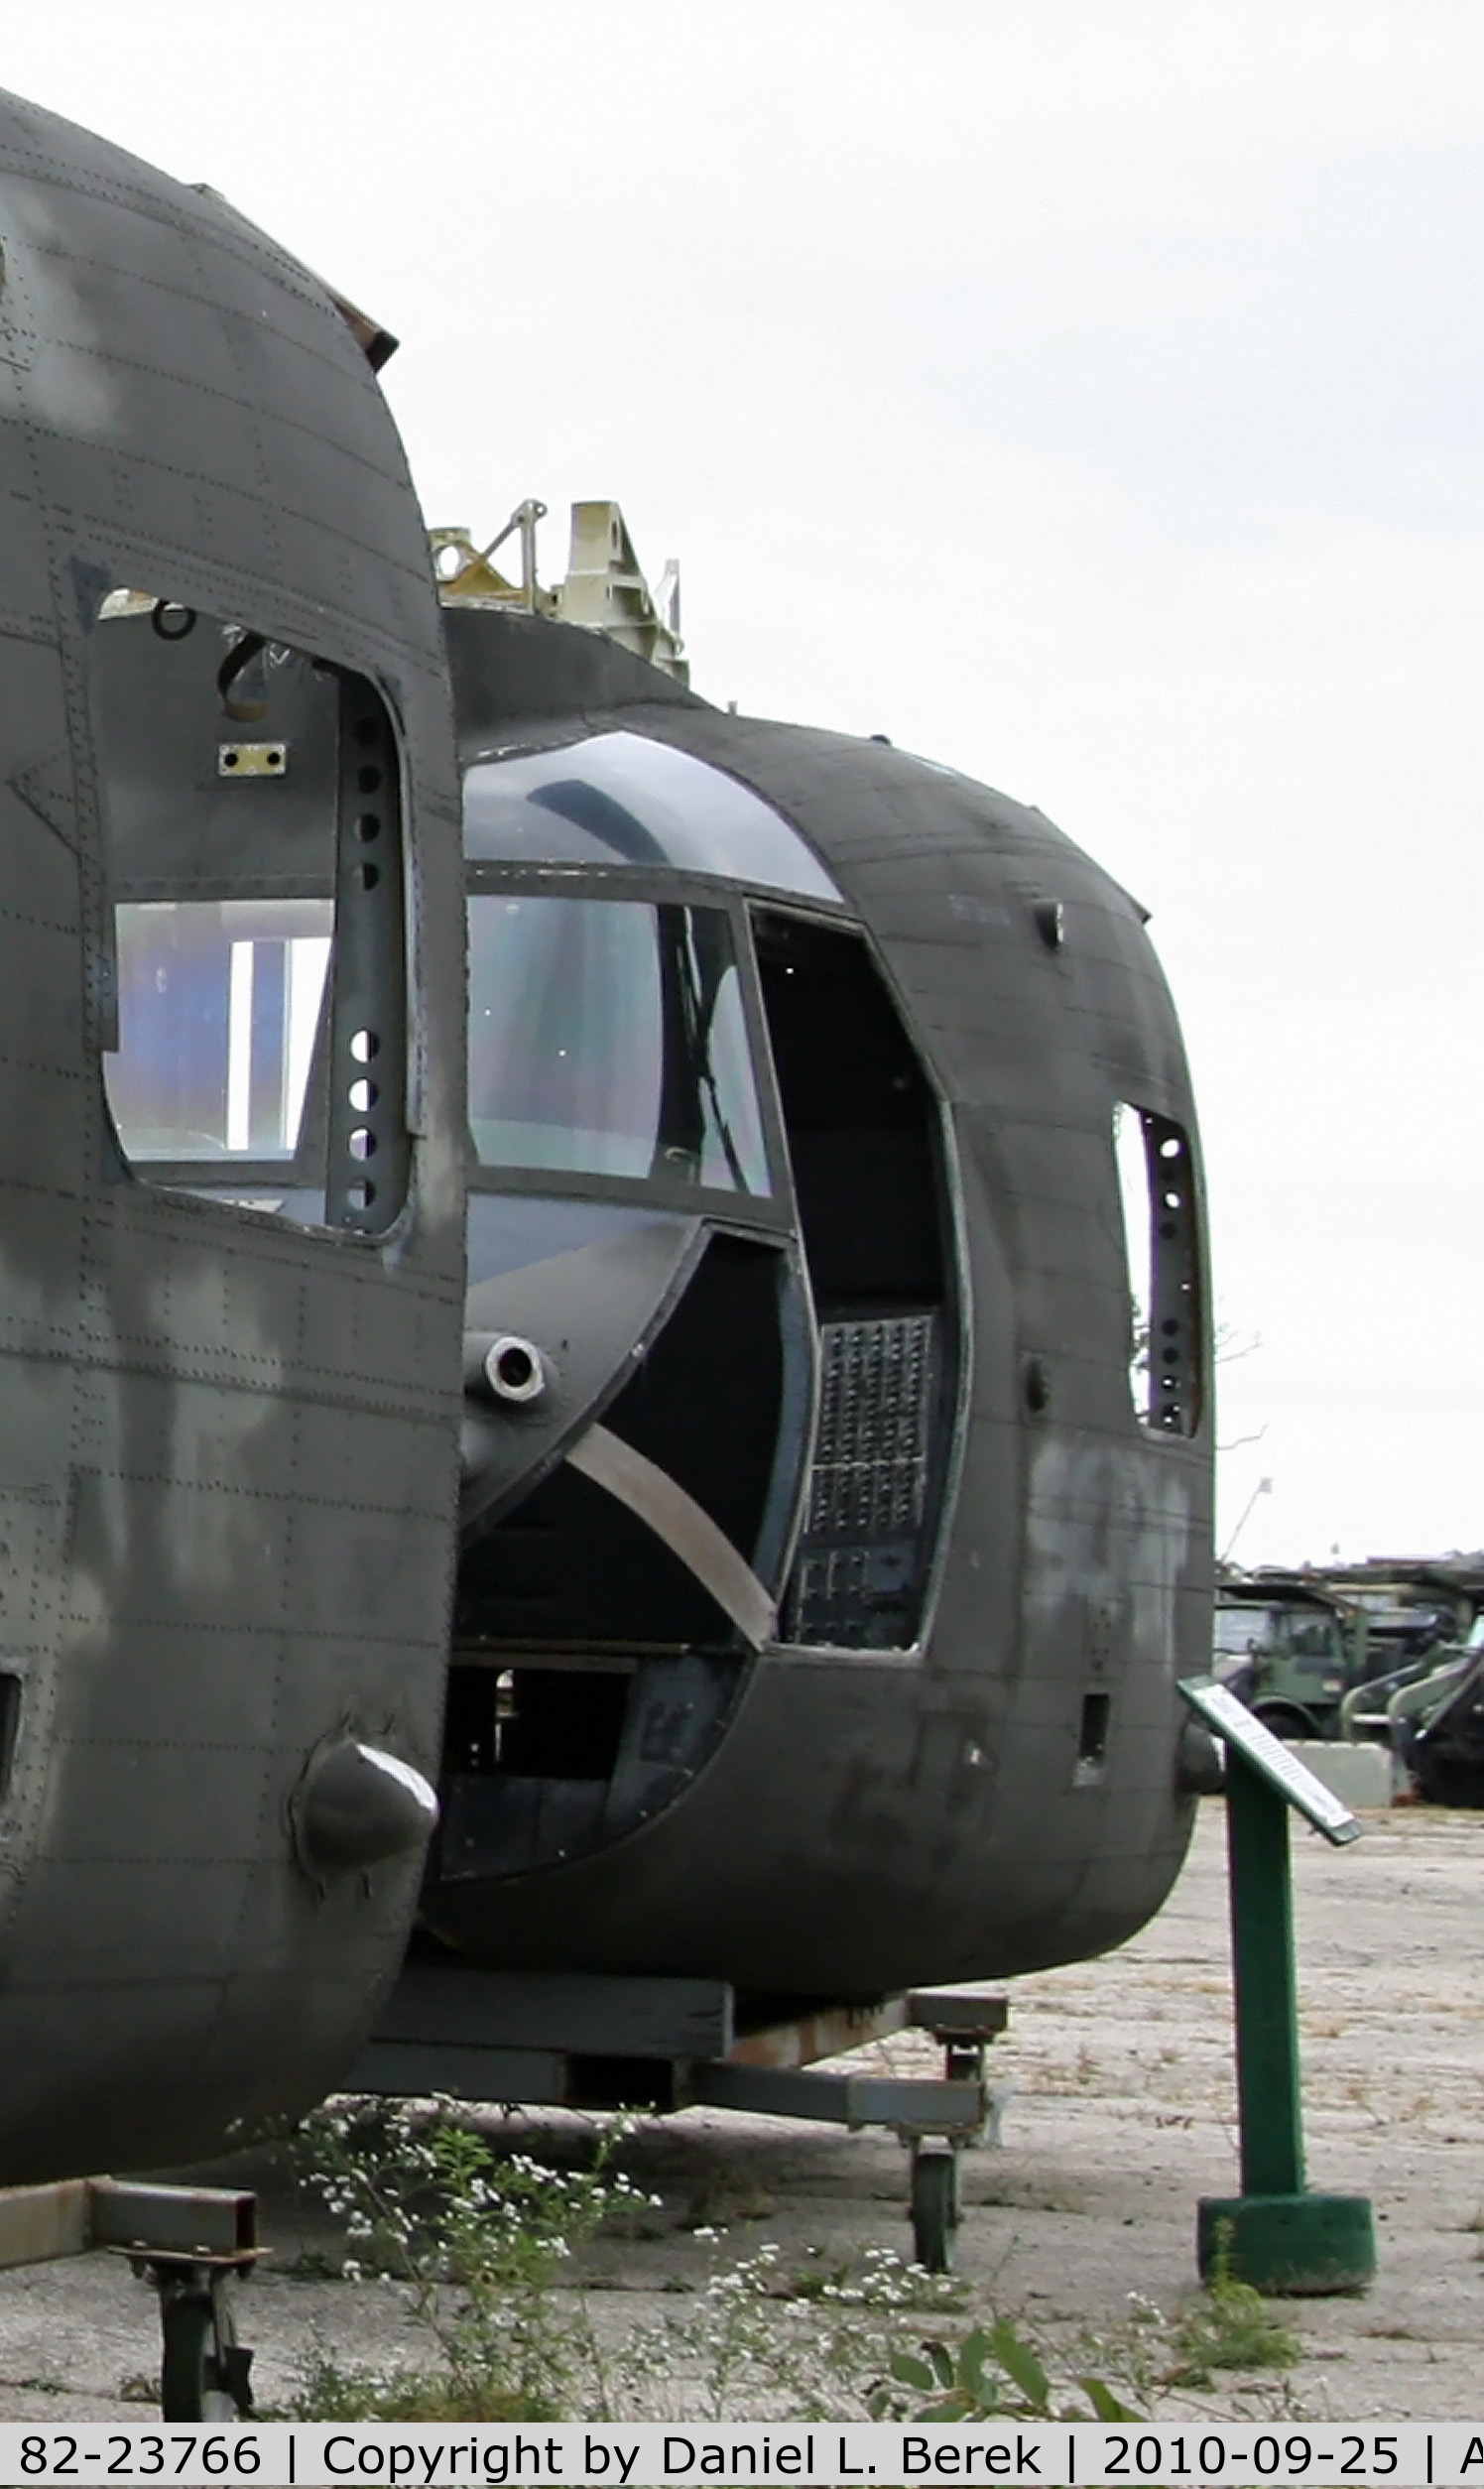 82-23766, 1982 Boeing Vertol CH-47D Chinook C/N M.3017, One of two Chinook noses on display at the Russell Military Museum